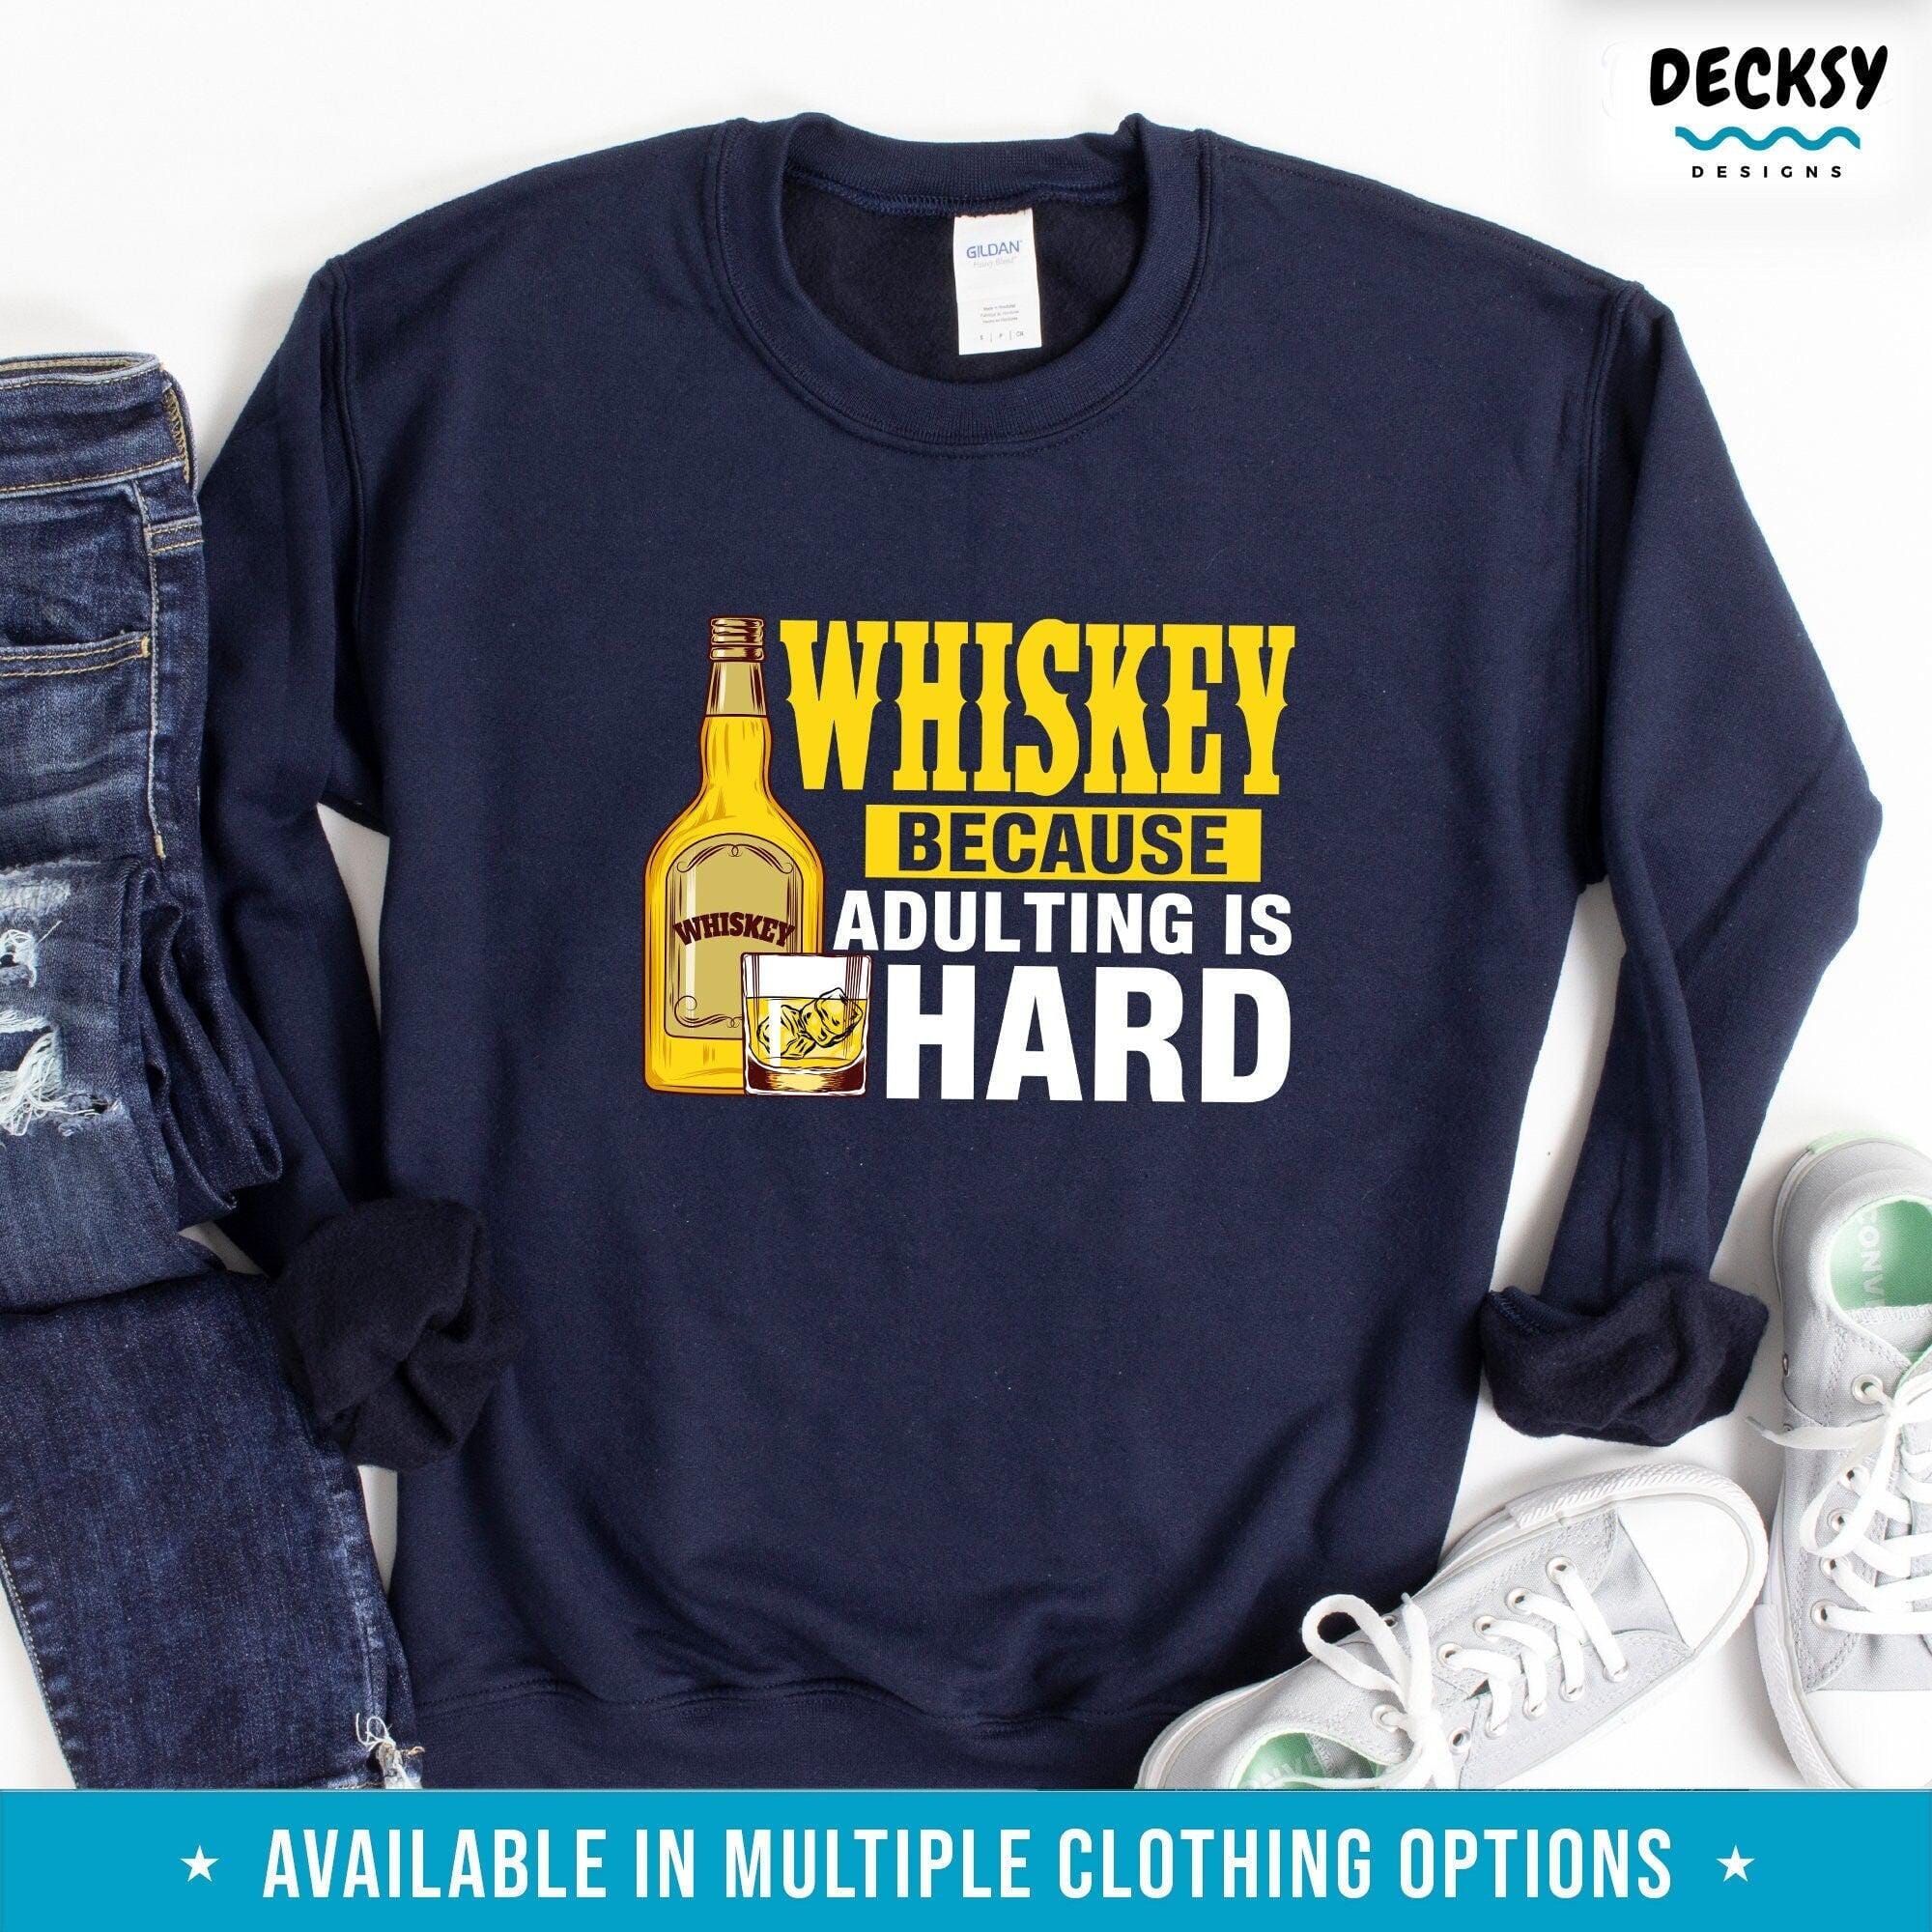 Adulting Shirt, Whiskey Lover Gift, Adulting Is Hard Funny T-Shirt-Clothing:Gender-Neutral Adult Clothing:Tops & Tees:T-shirts:Graphic Tees-DecksyDesigns